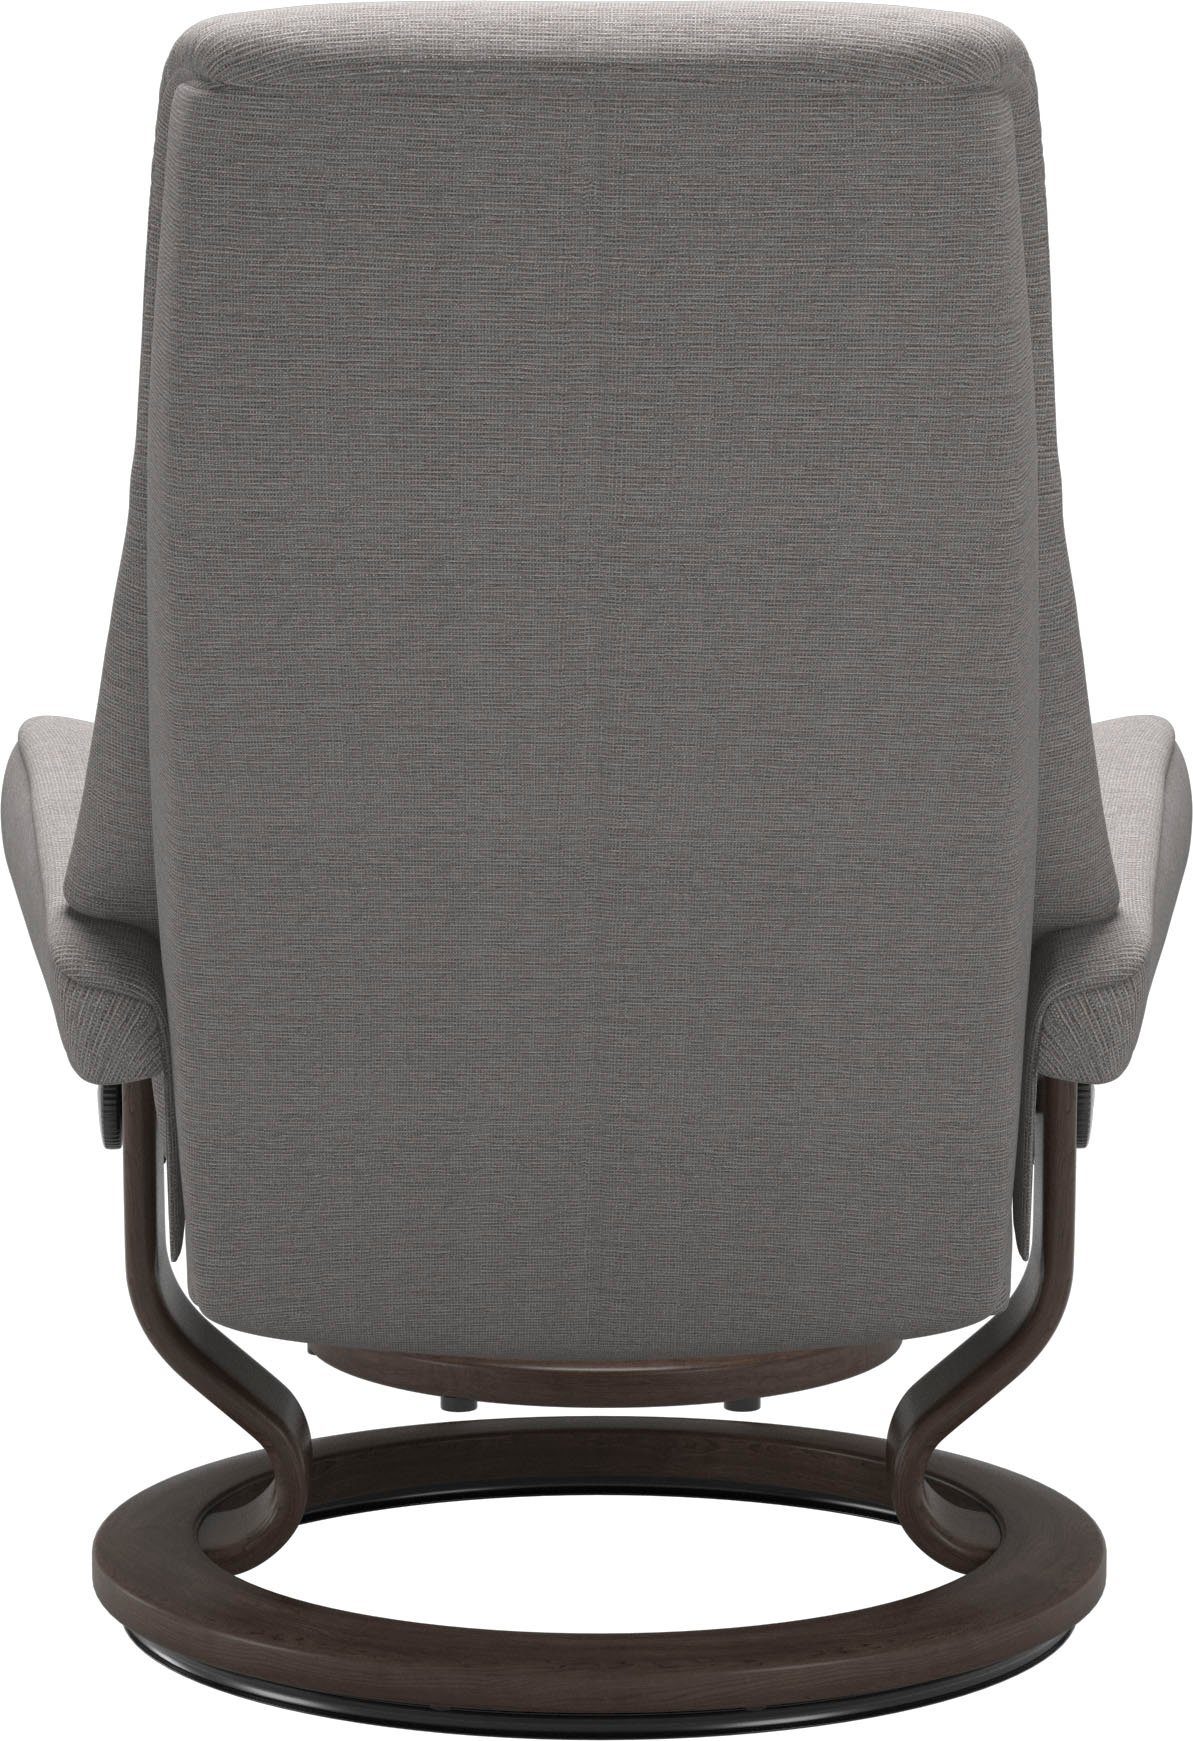 Base, View, Wenge mit Größe Stressless® Relaxsessel Classic L,Gestell